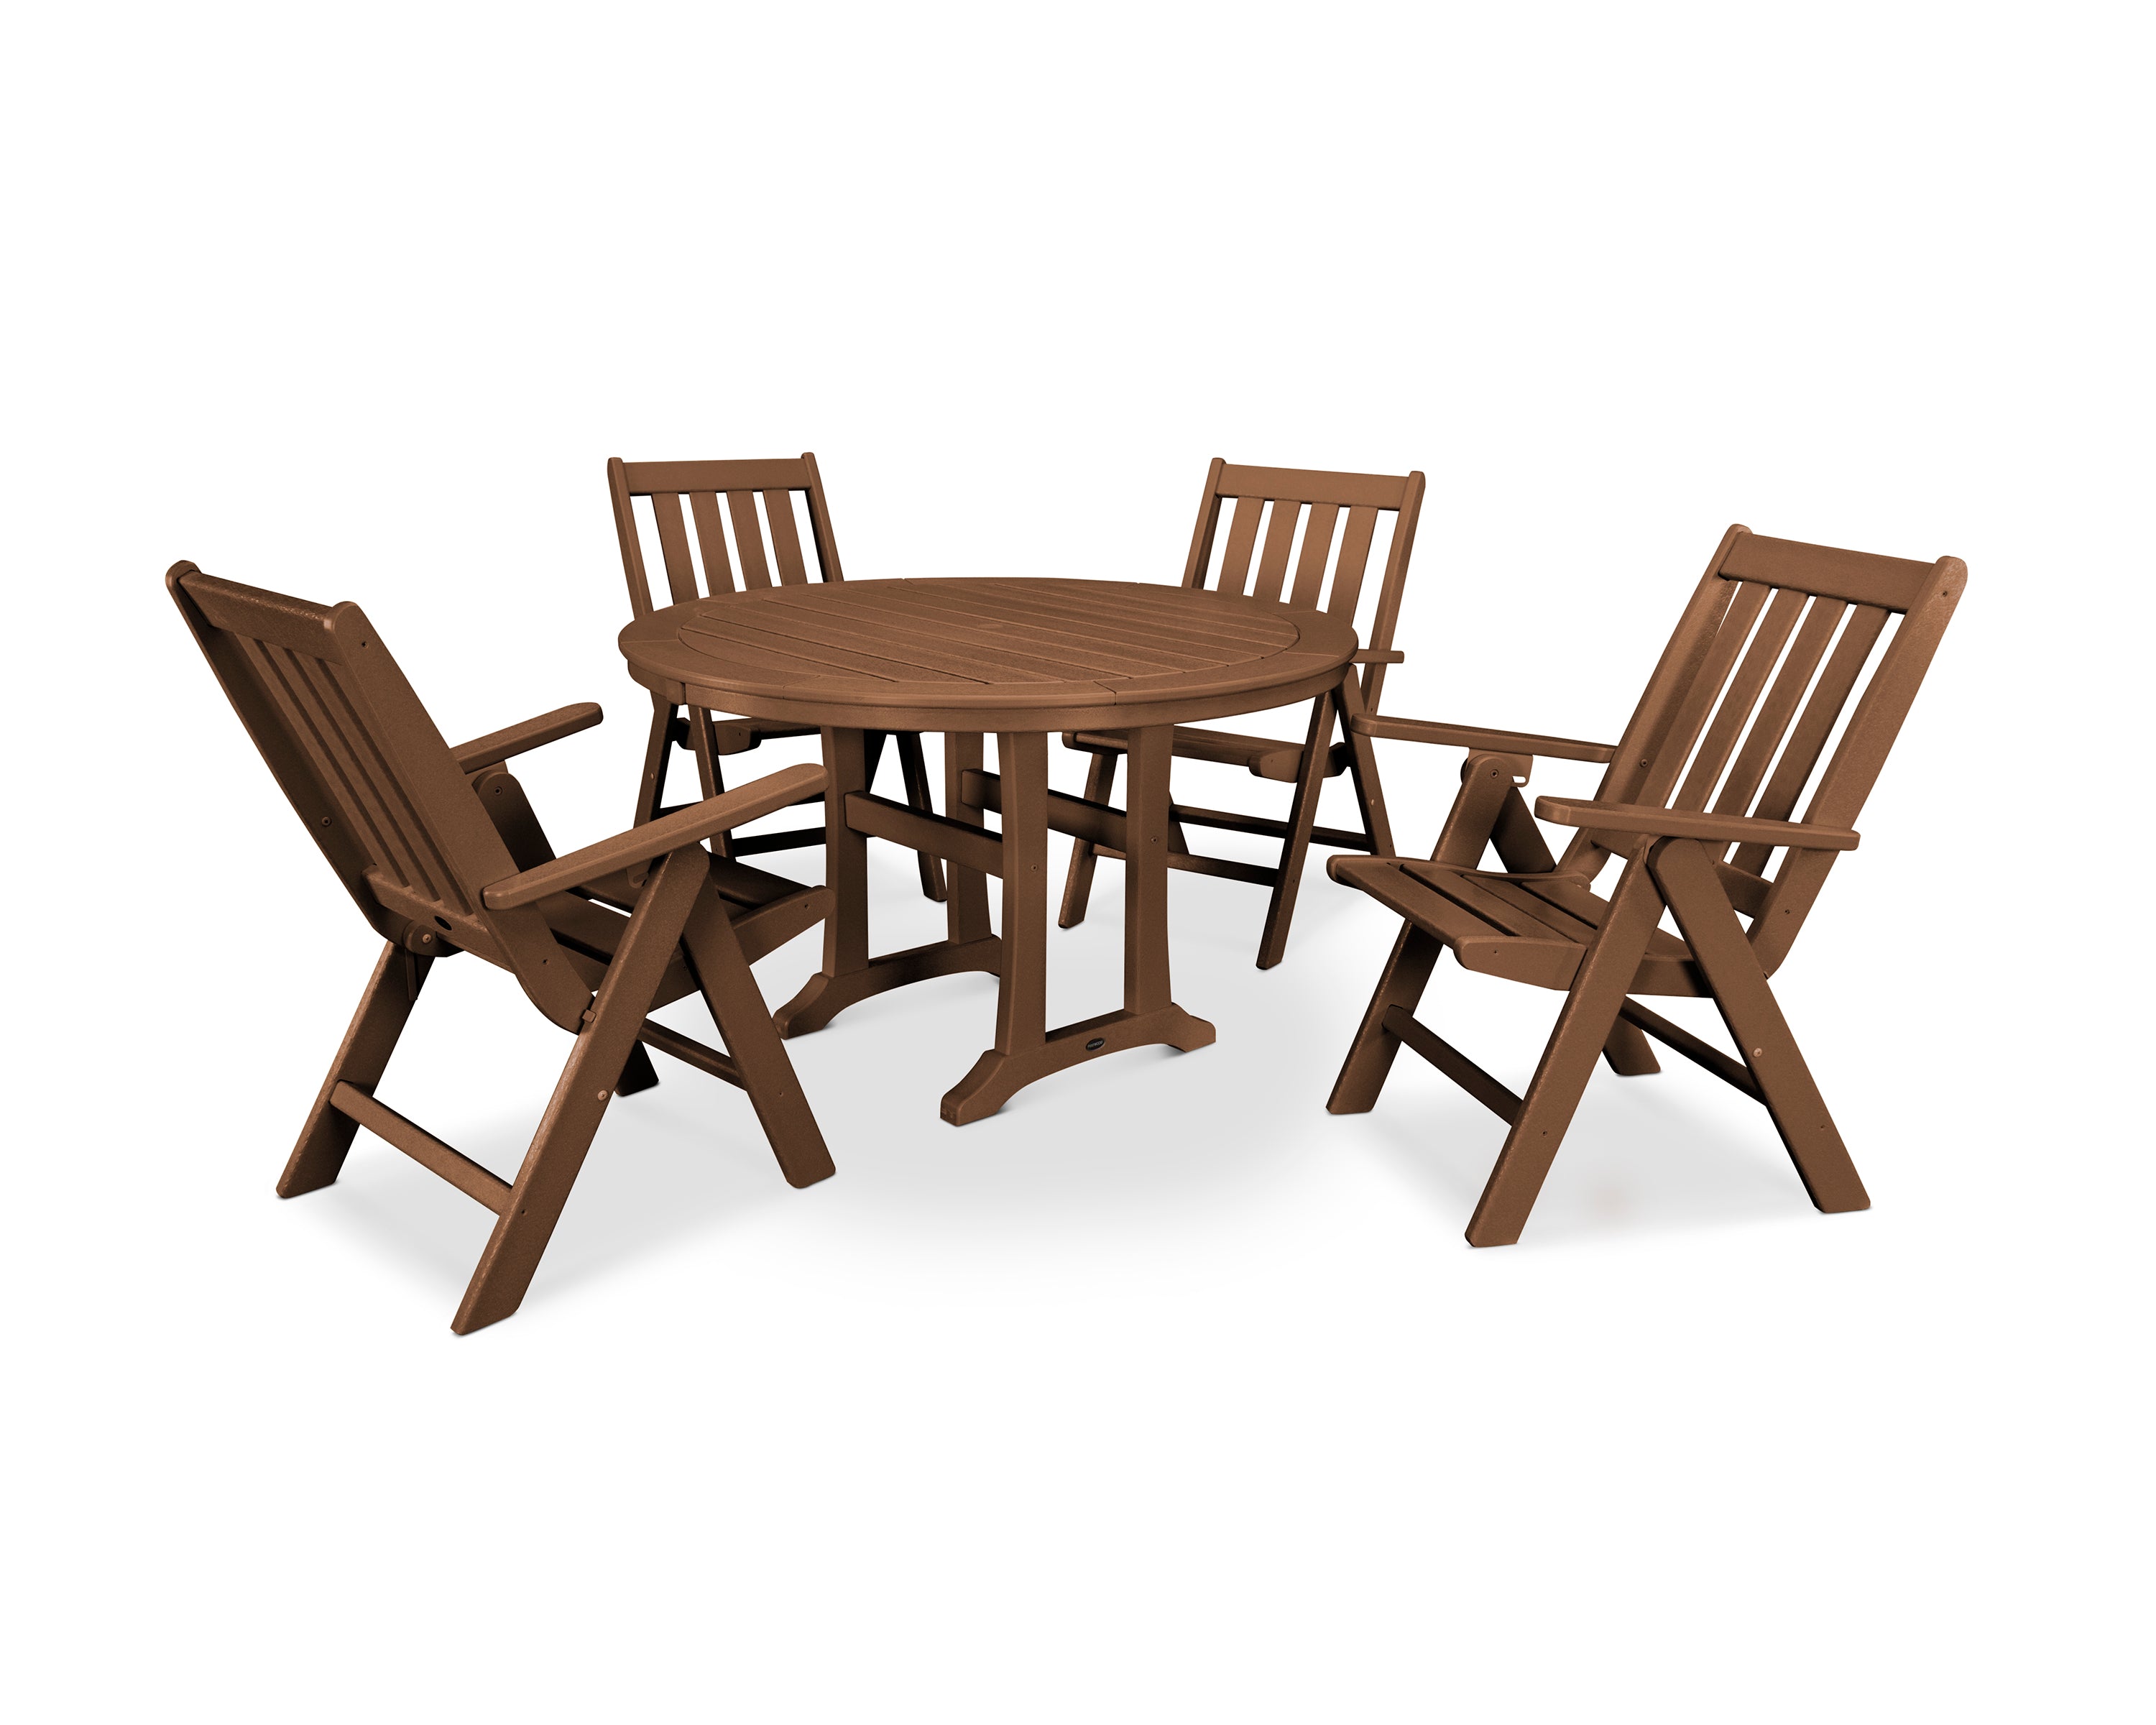 POLYWOOD® Vineyard Folding Chair 5-Piece Round Dining Set with Trestle Legs in Teak